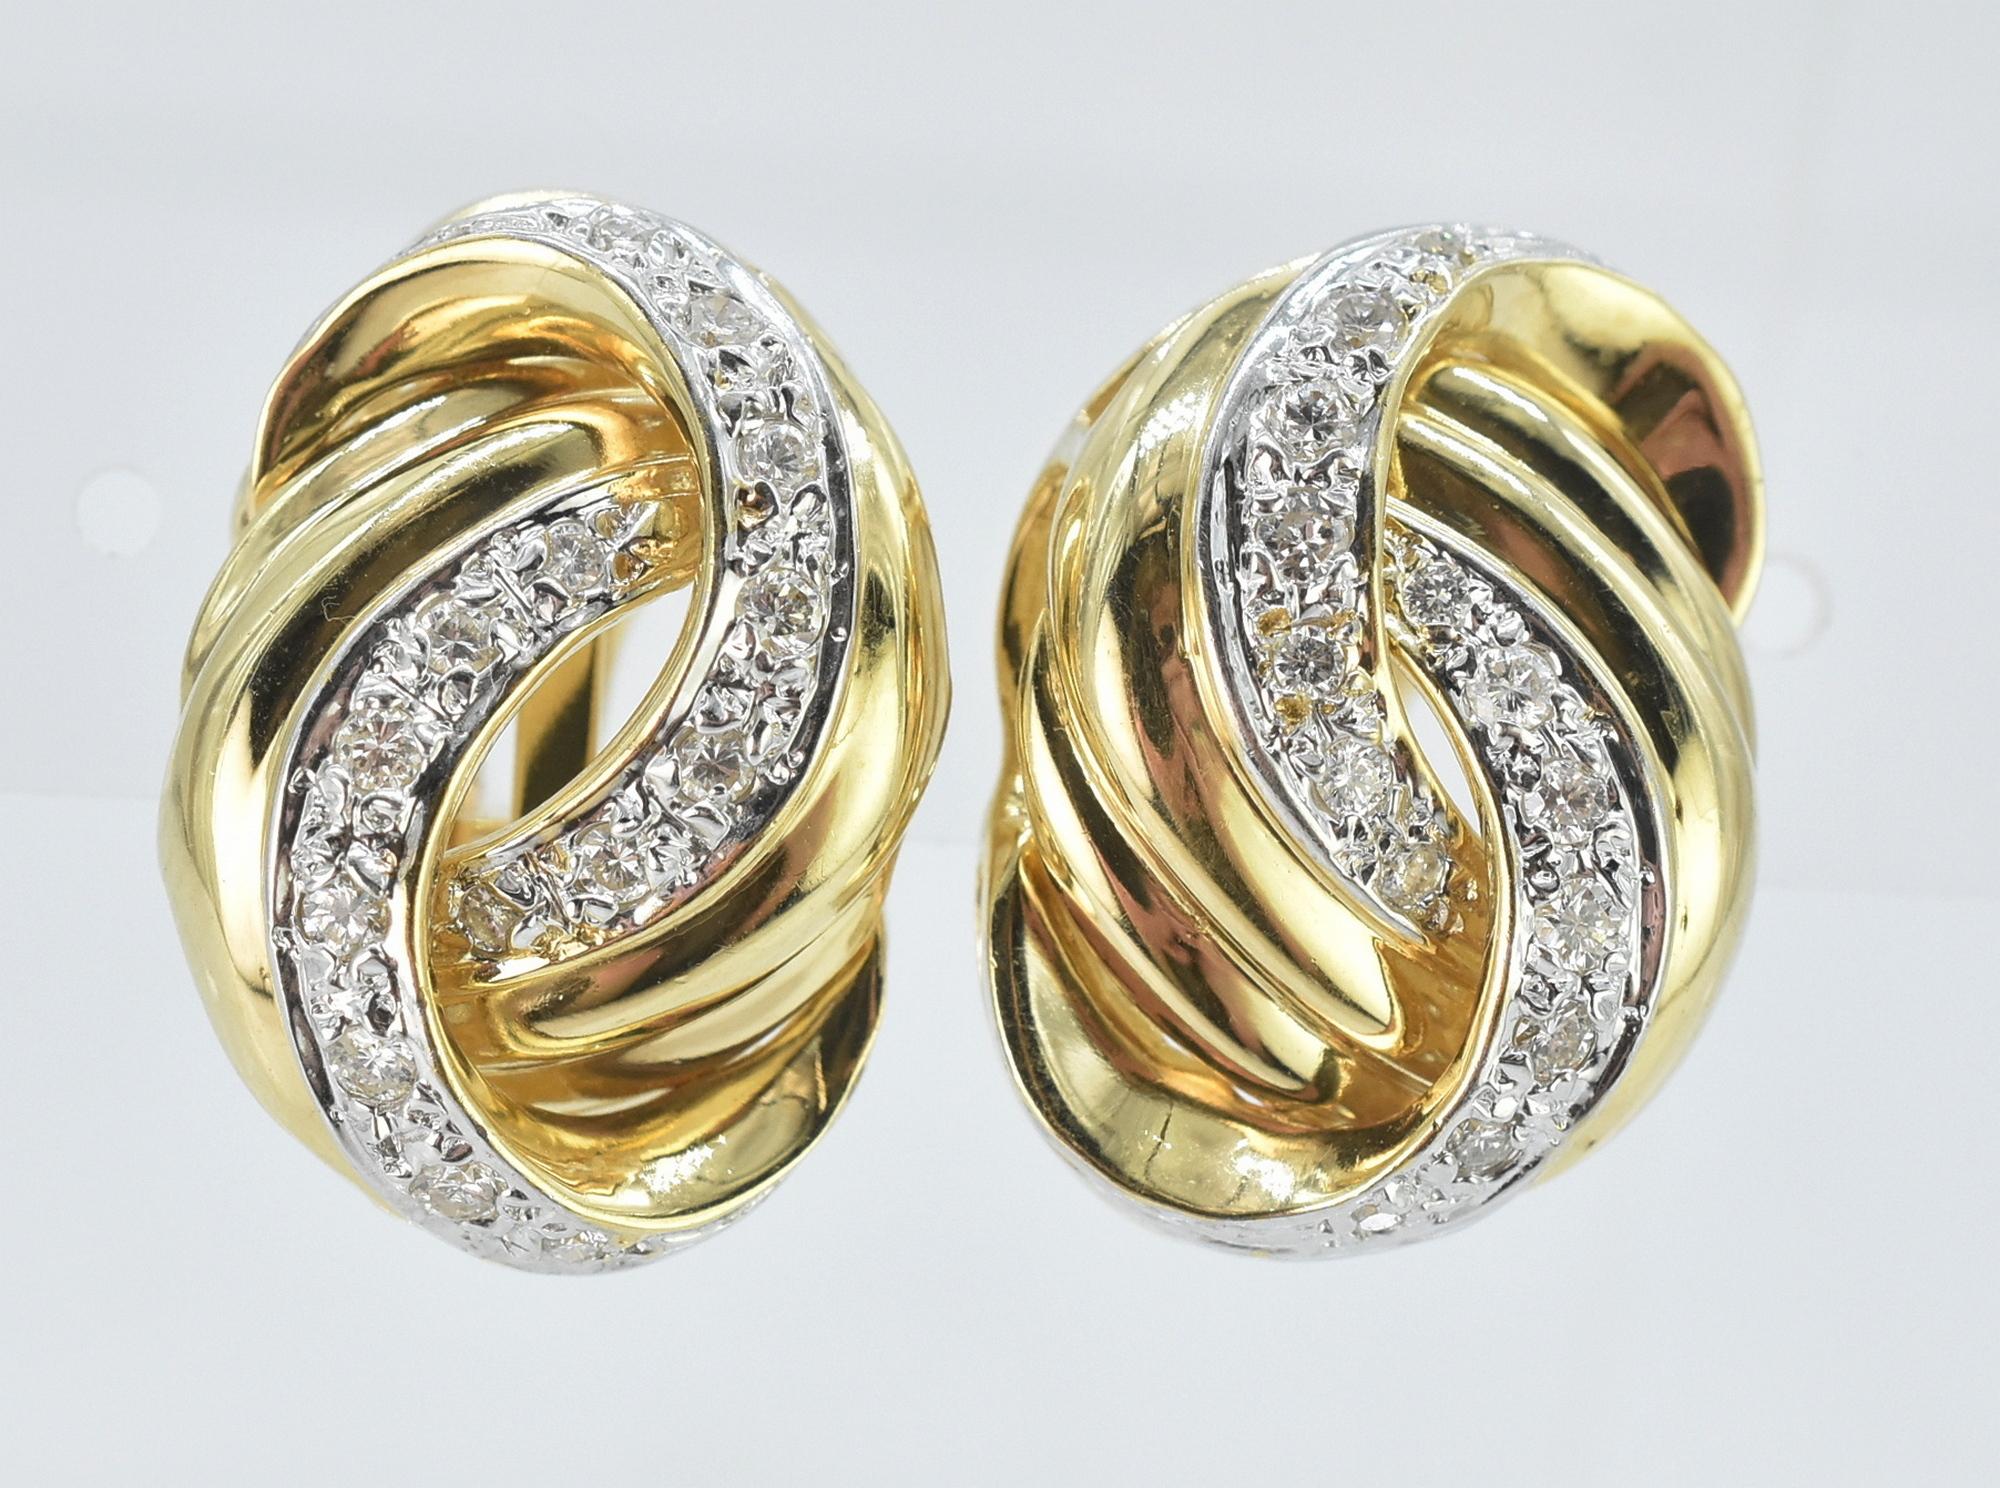 20th Century 14k Gold and 1.5cttw Diamond Knot Earrings For Sale